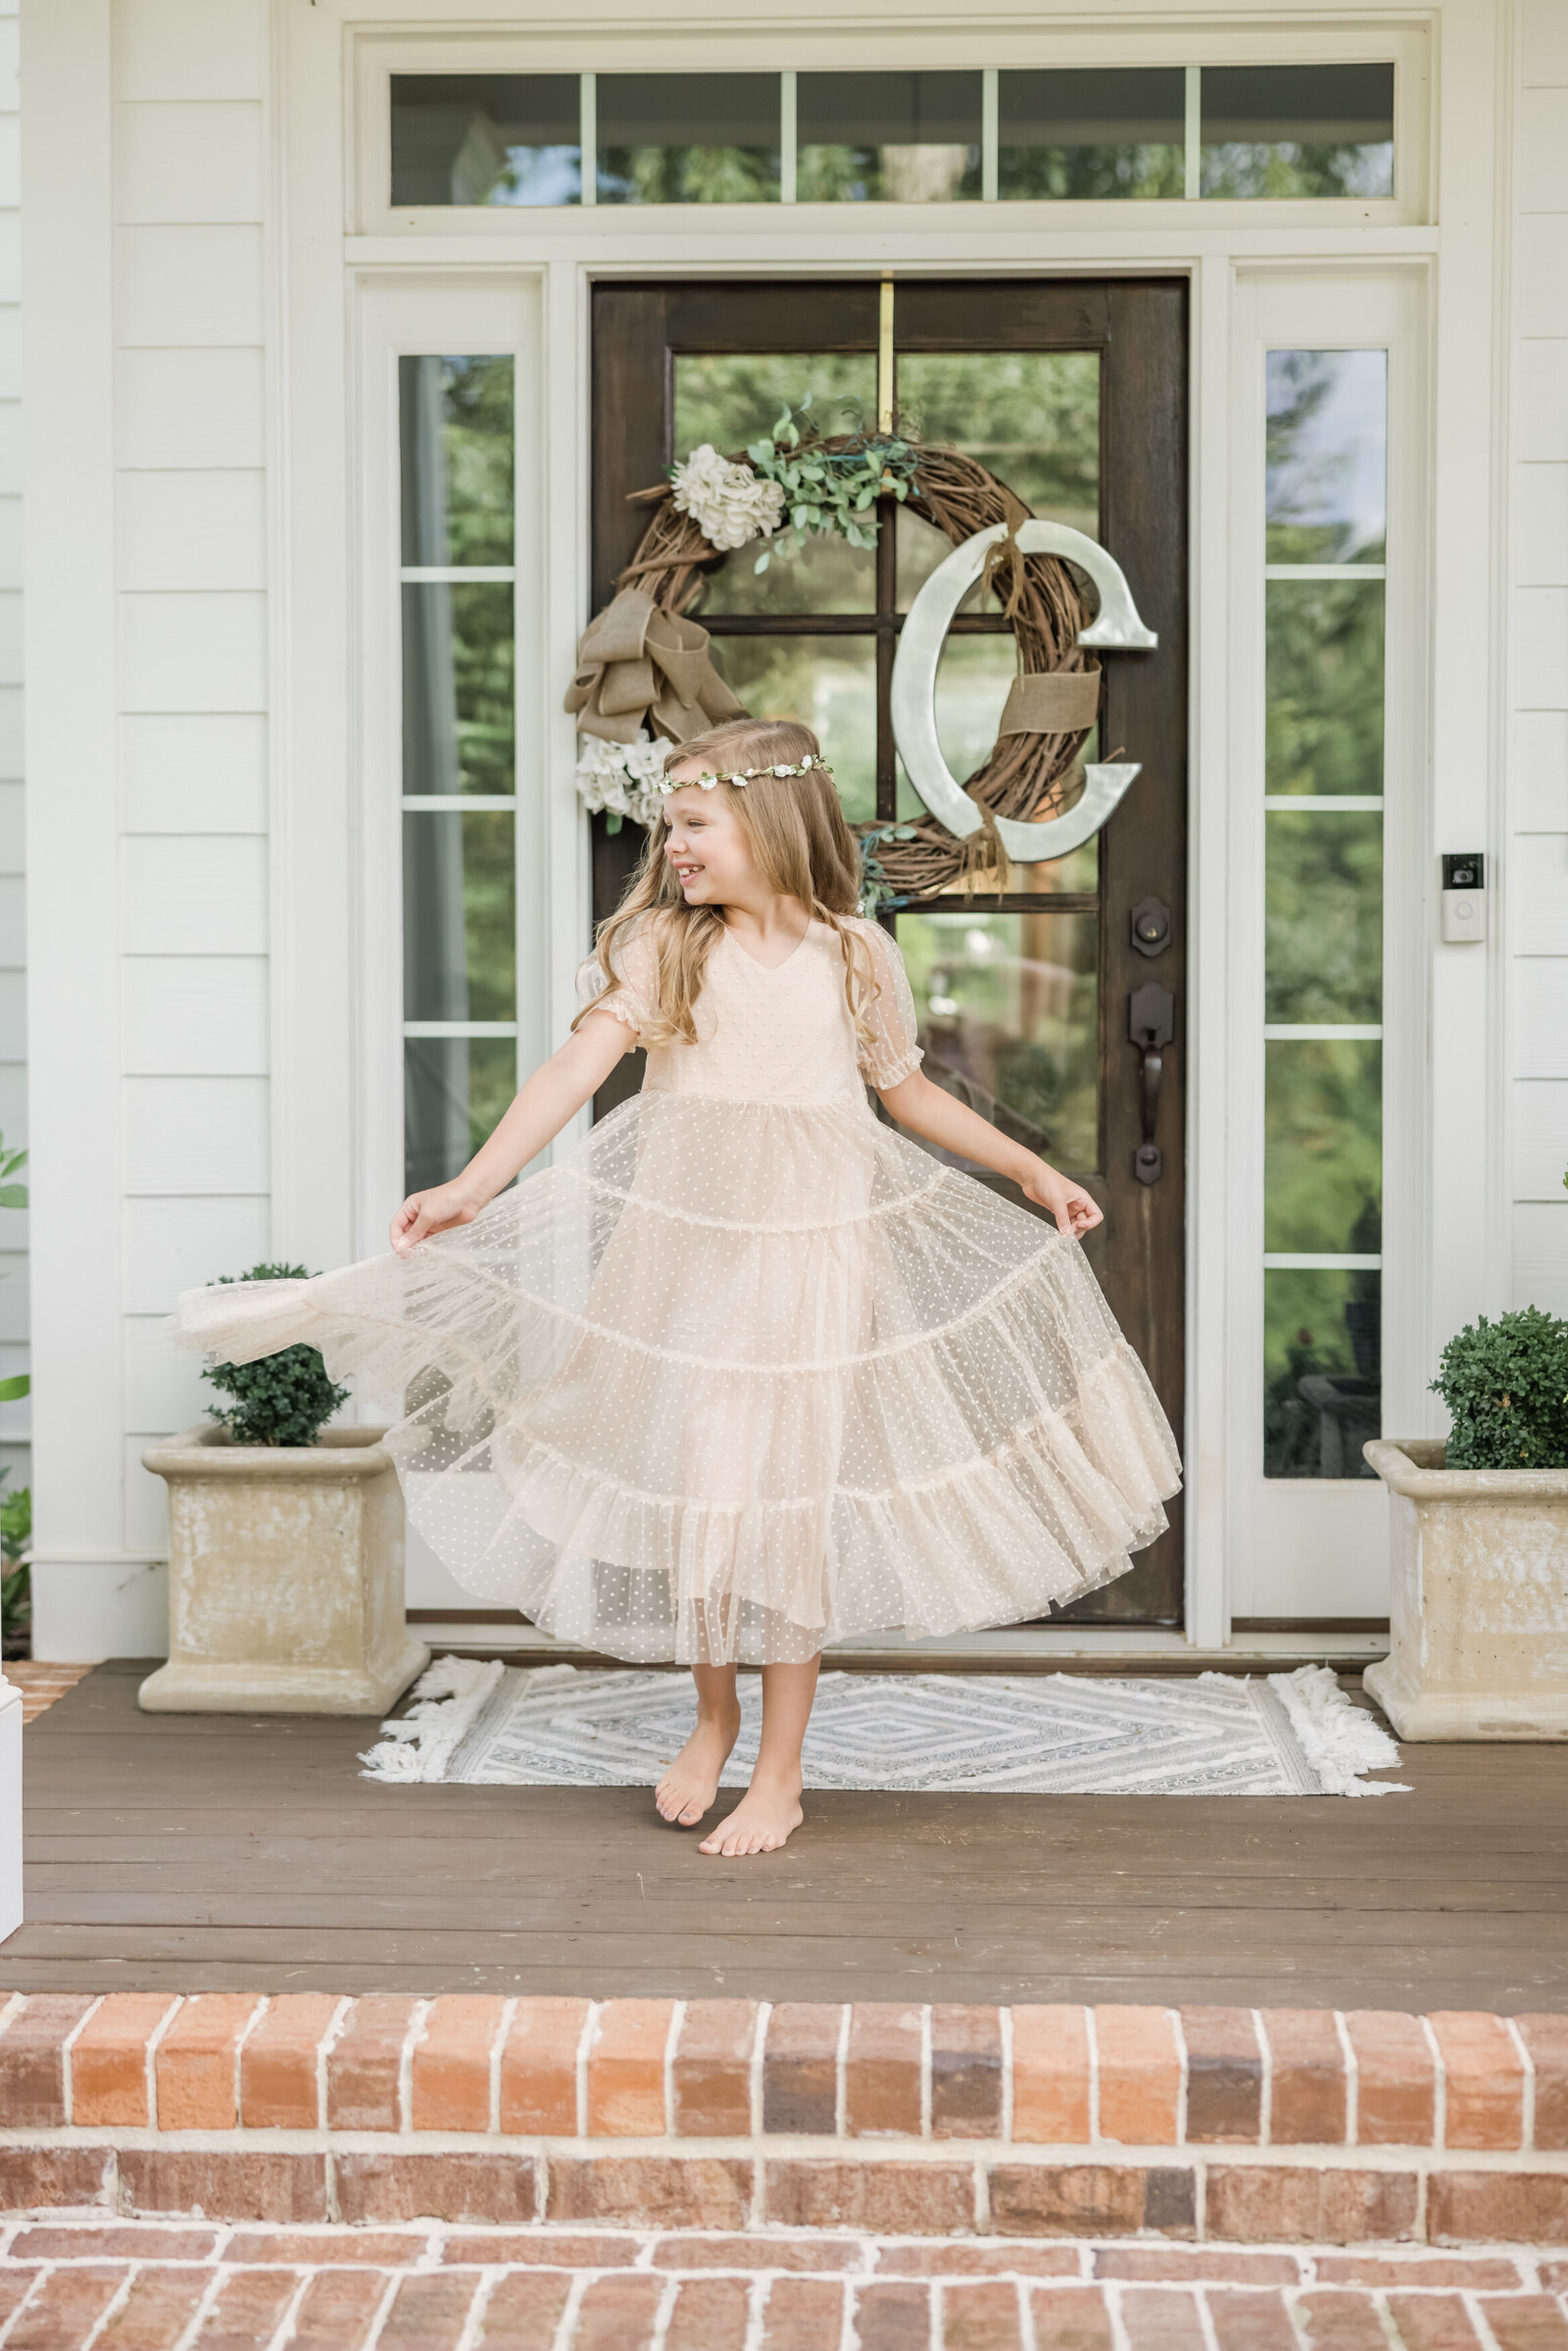 Girl twirling in dress on front porch.